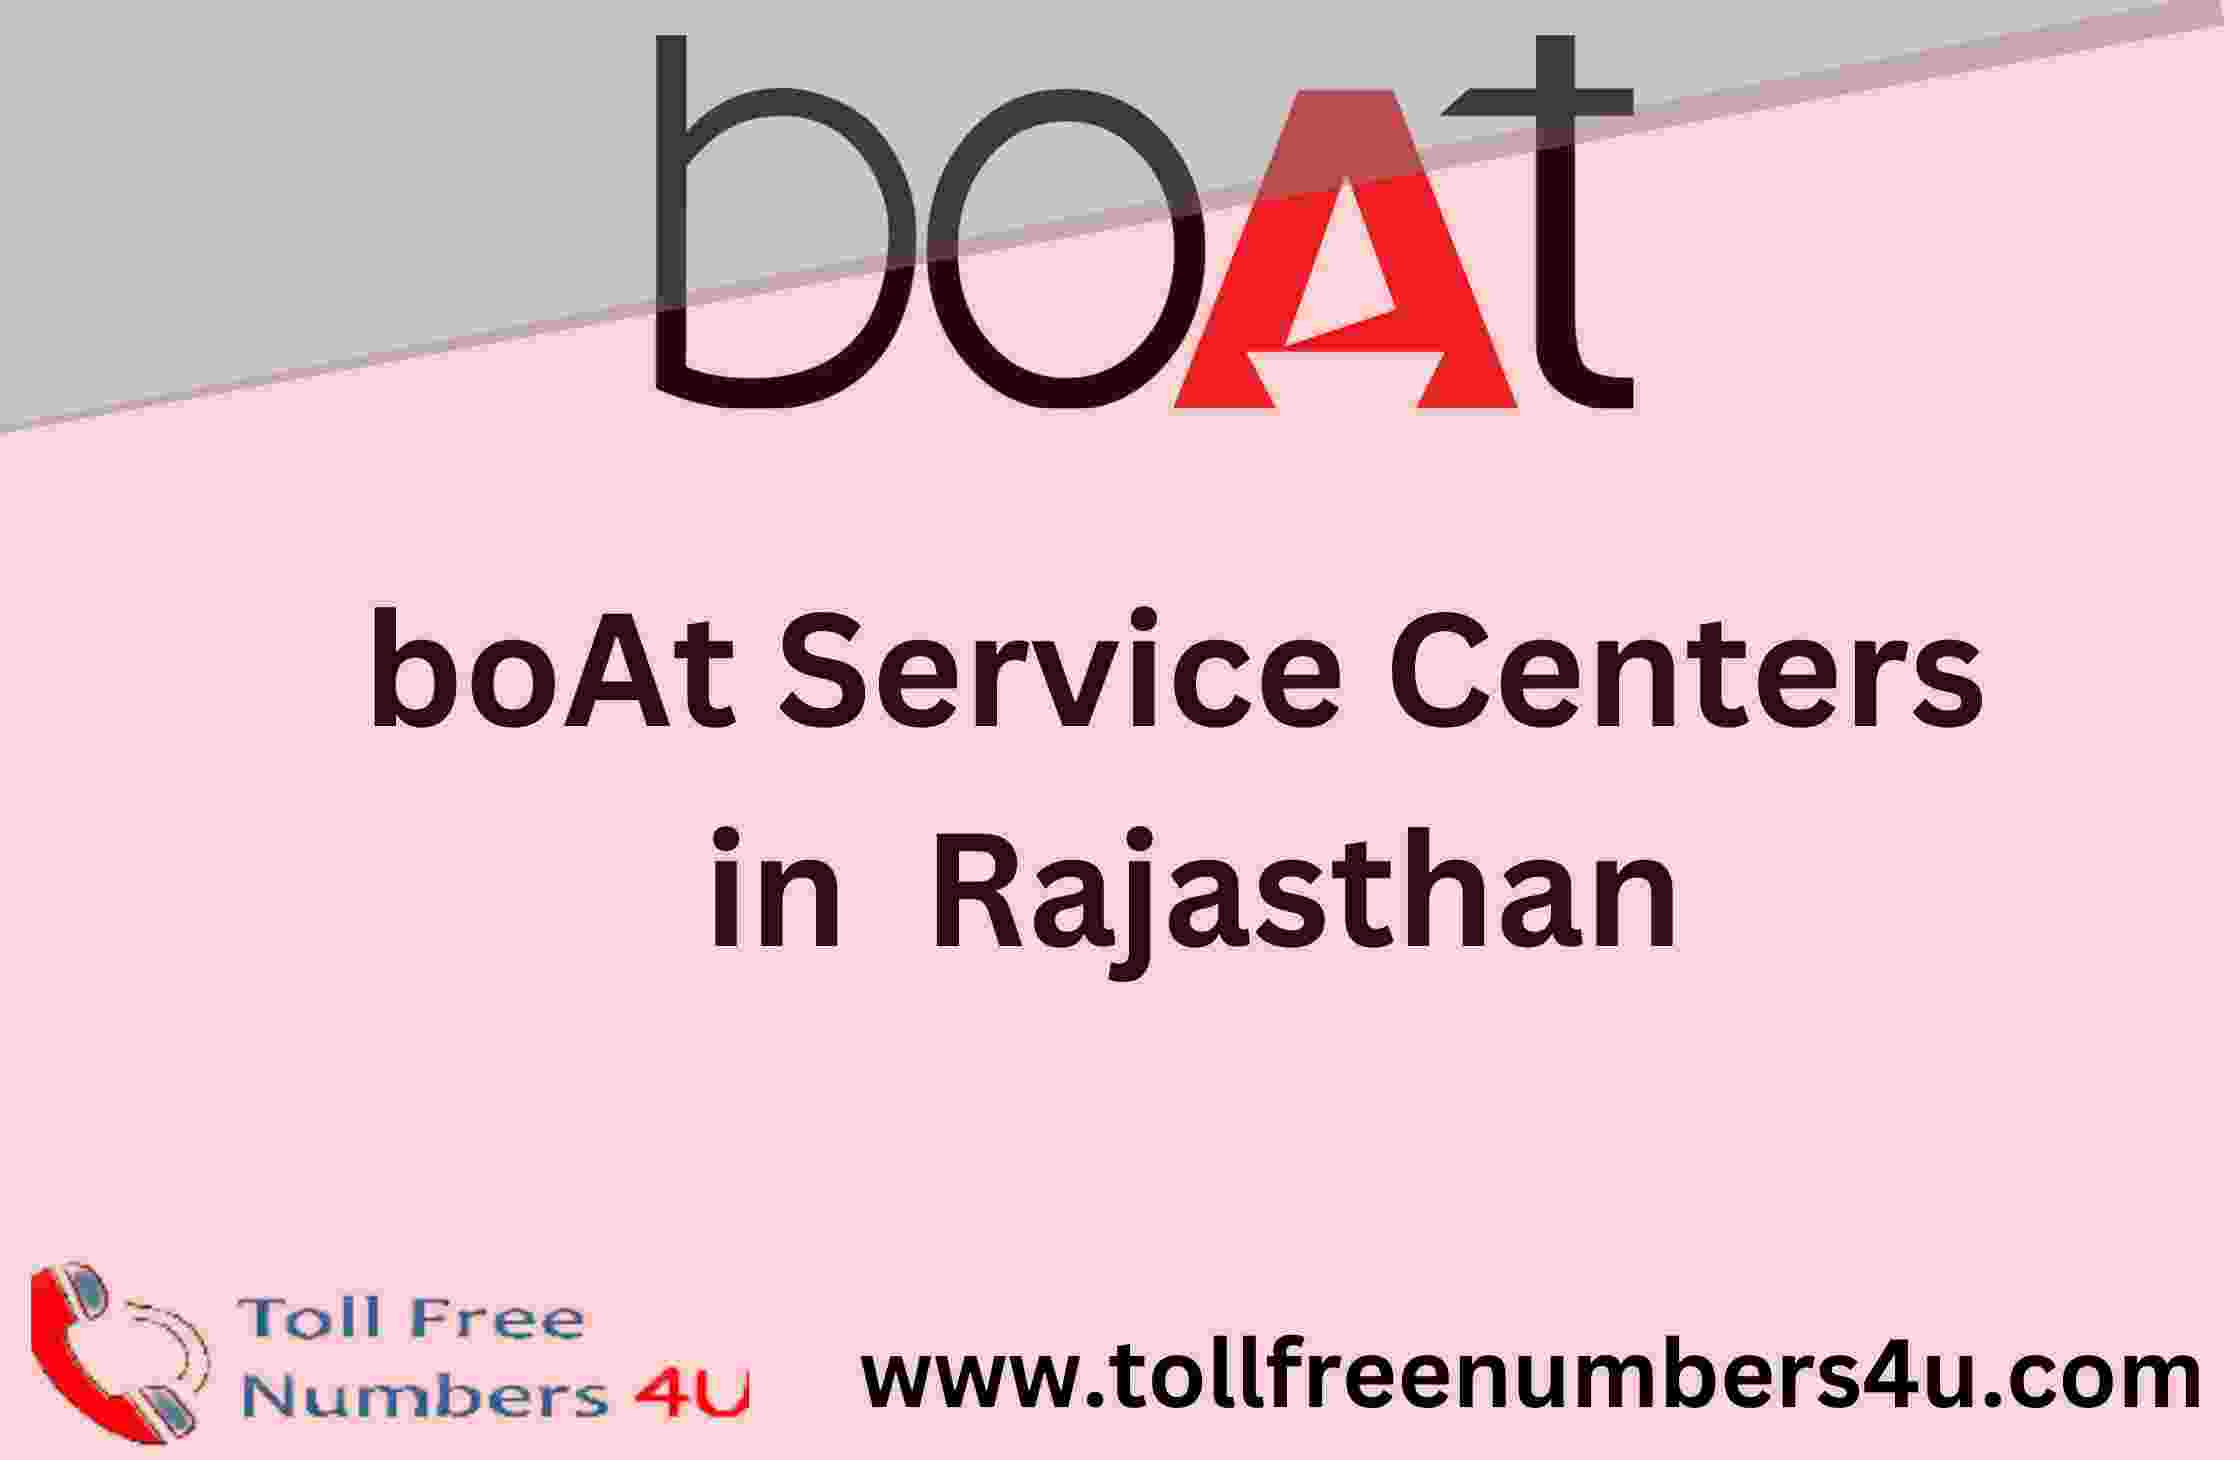 boAt Service Center in Rajsthan - TollFreeNumbers4u